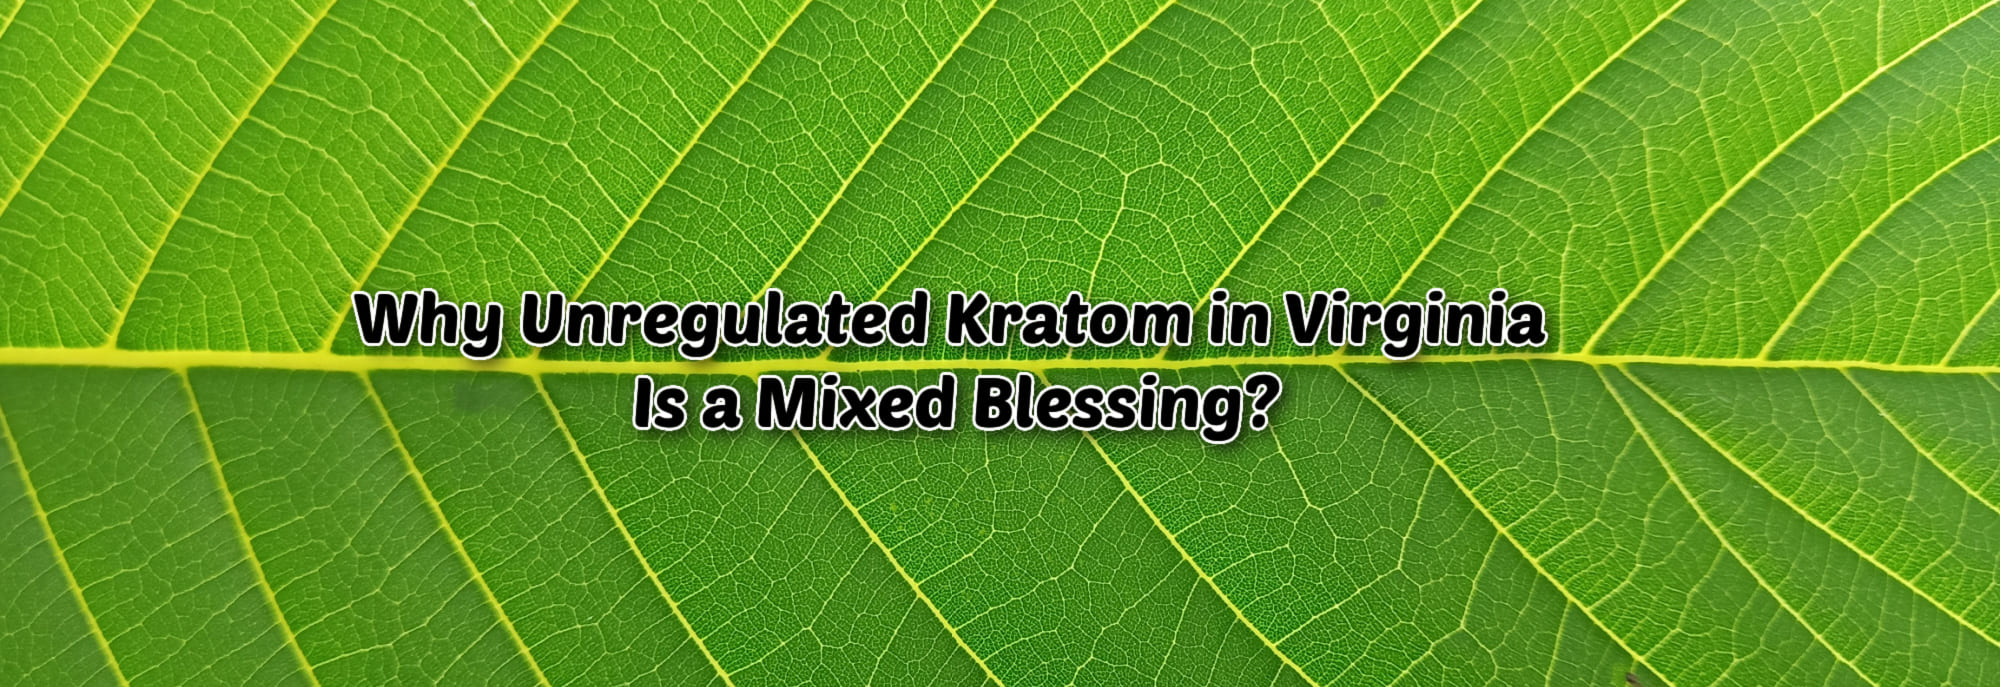 image of why unregulated kratom in virginia is a mixed blessing